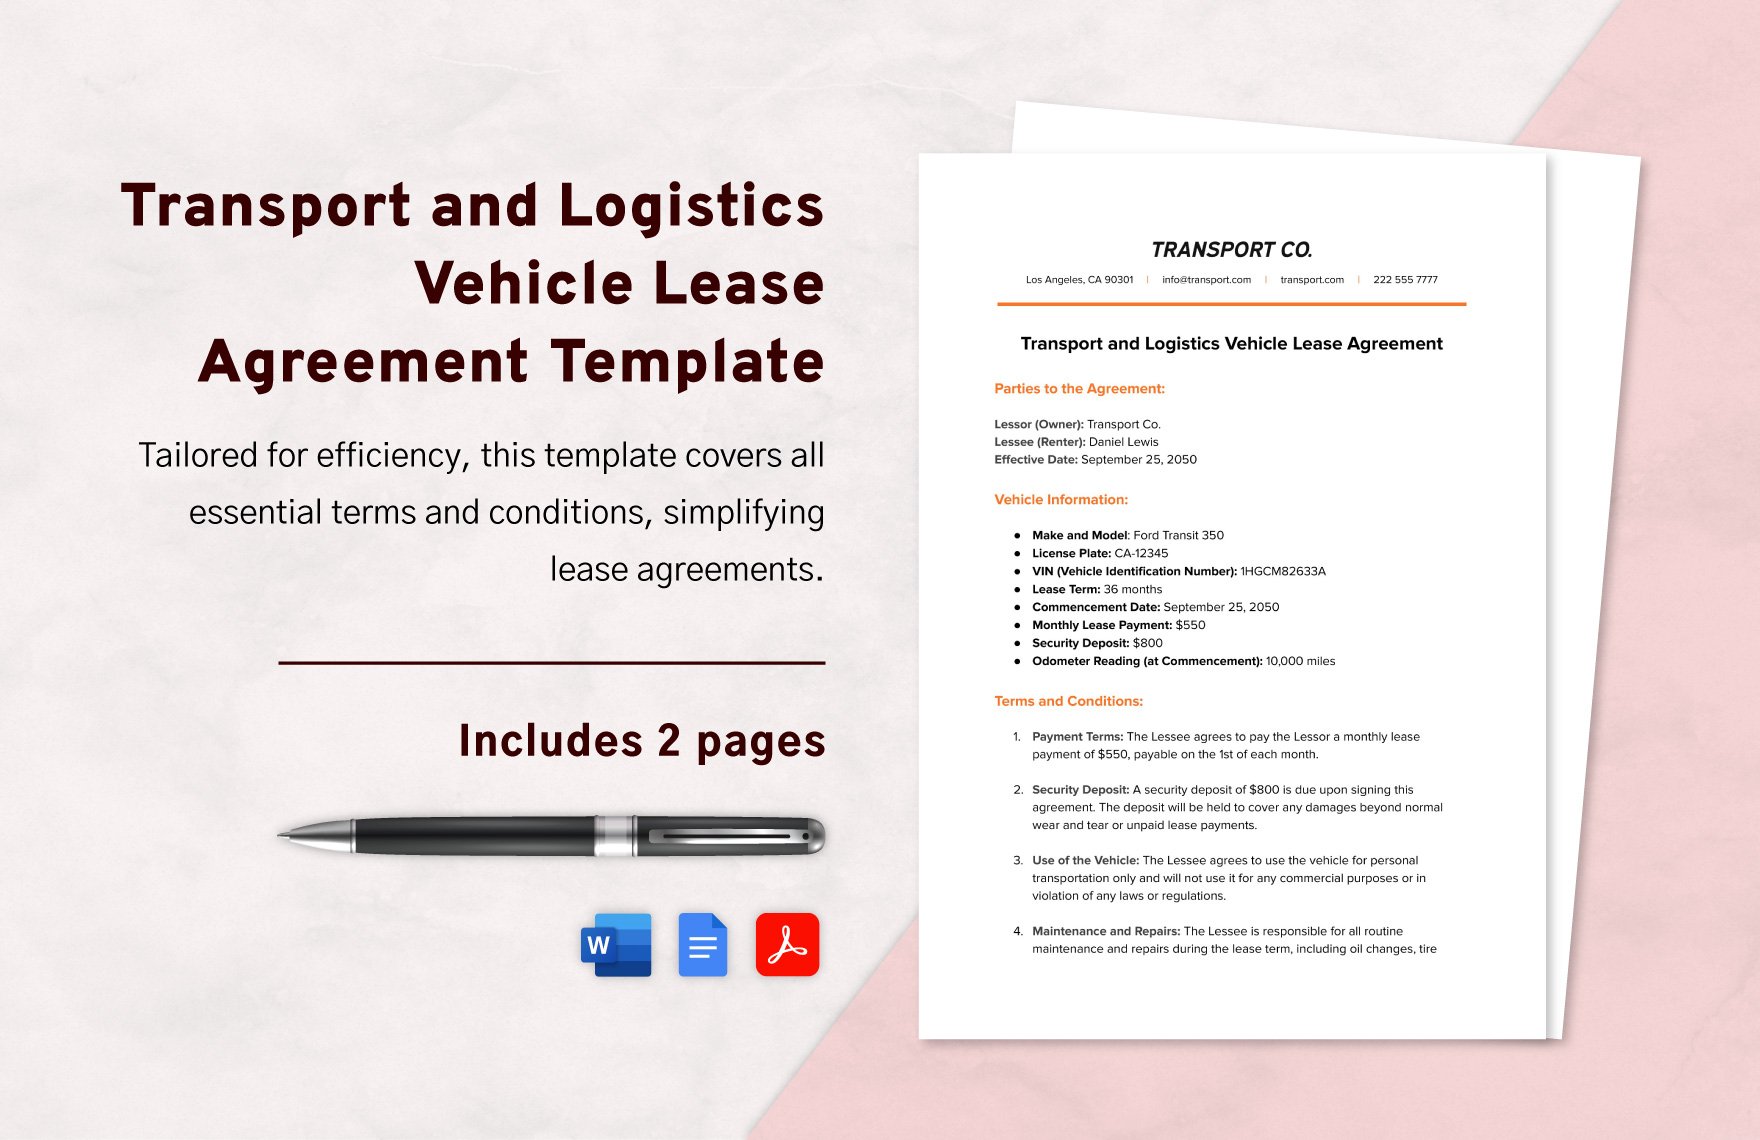 Transport and Logistics Vehicle Lease Agreement Template